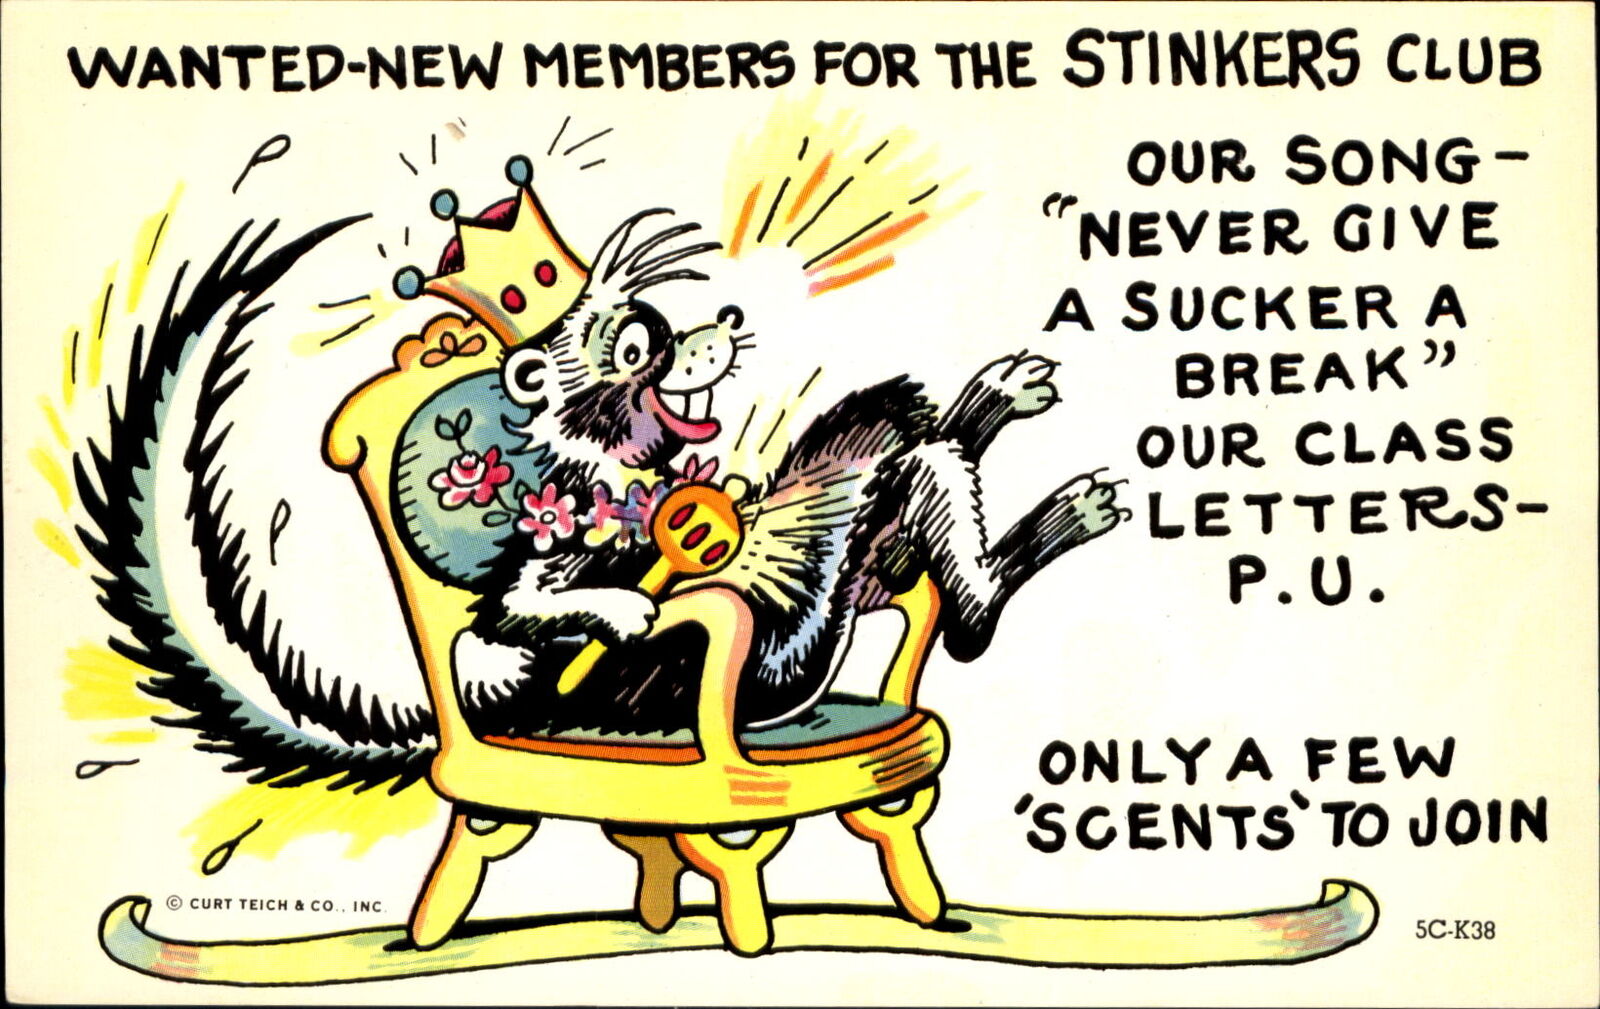 Humanized dressed skunk animal~Stinkers Club~pun comic 1960s~class letters PU